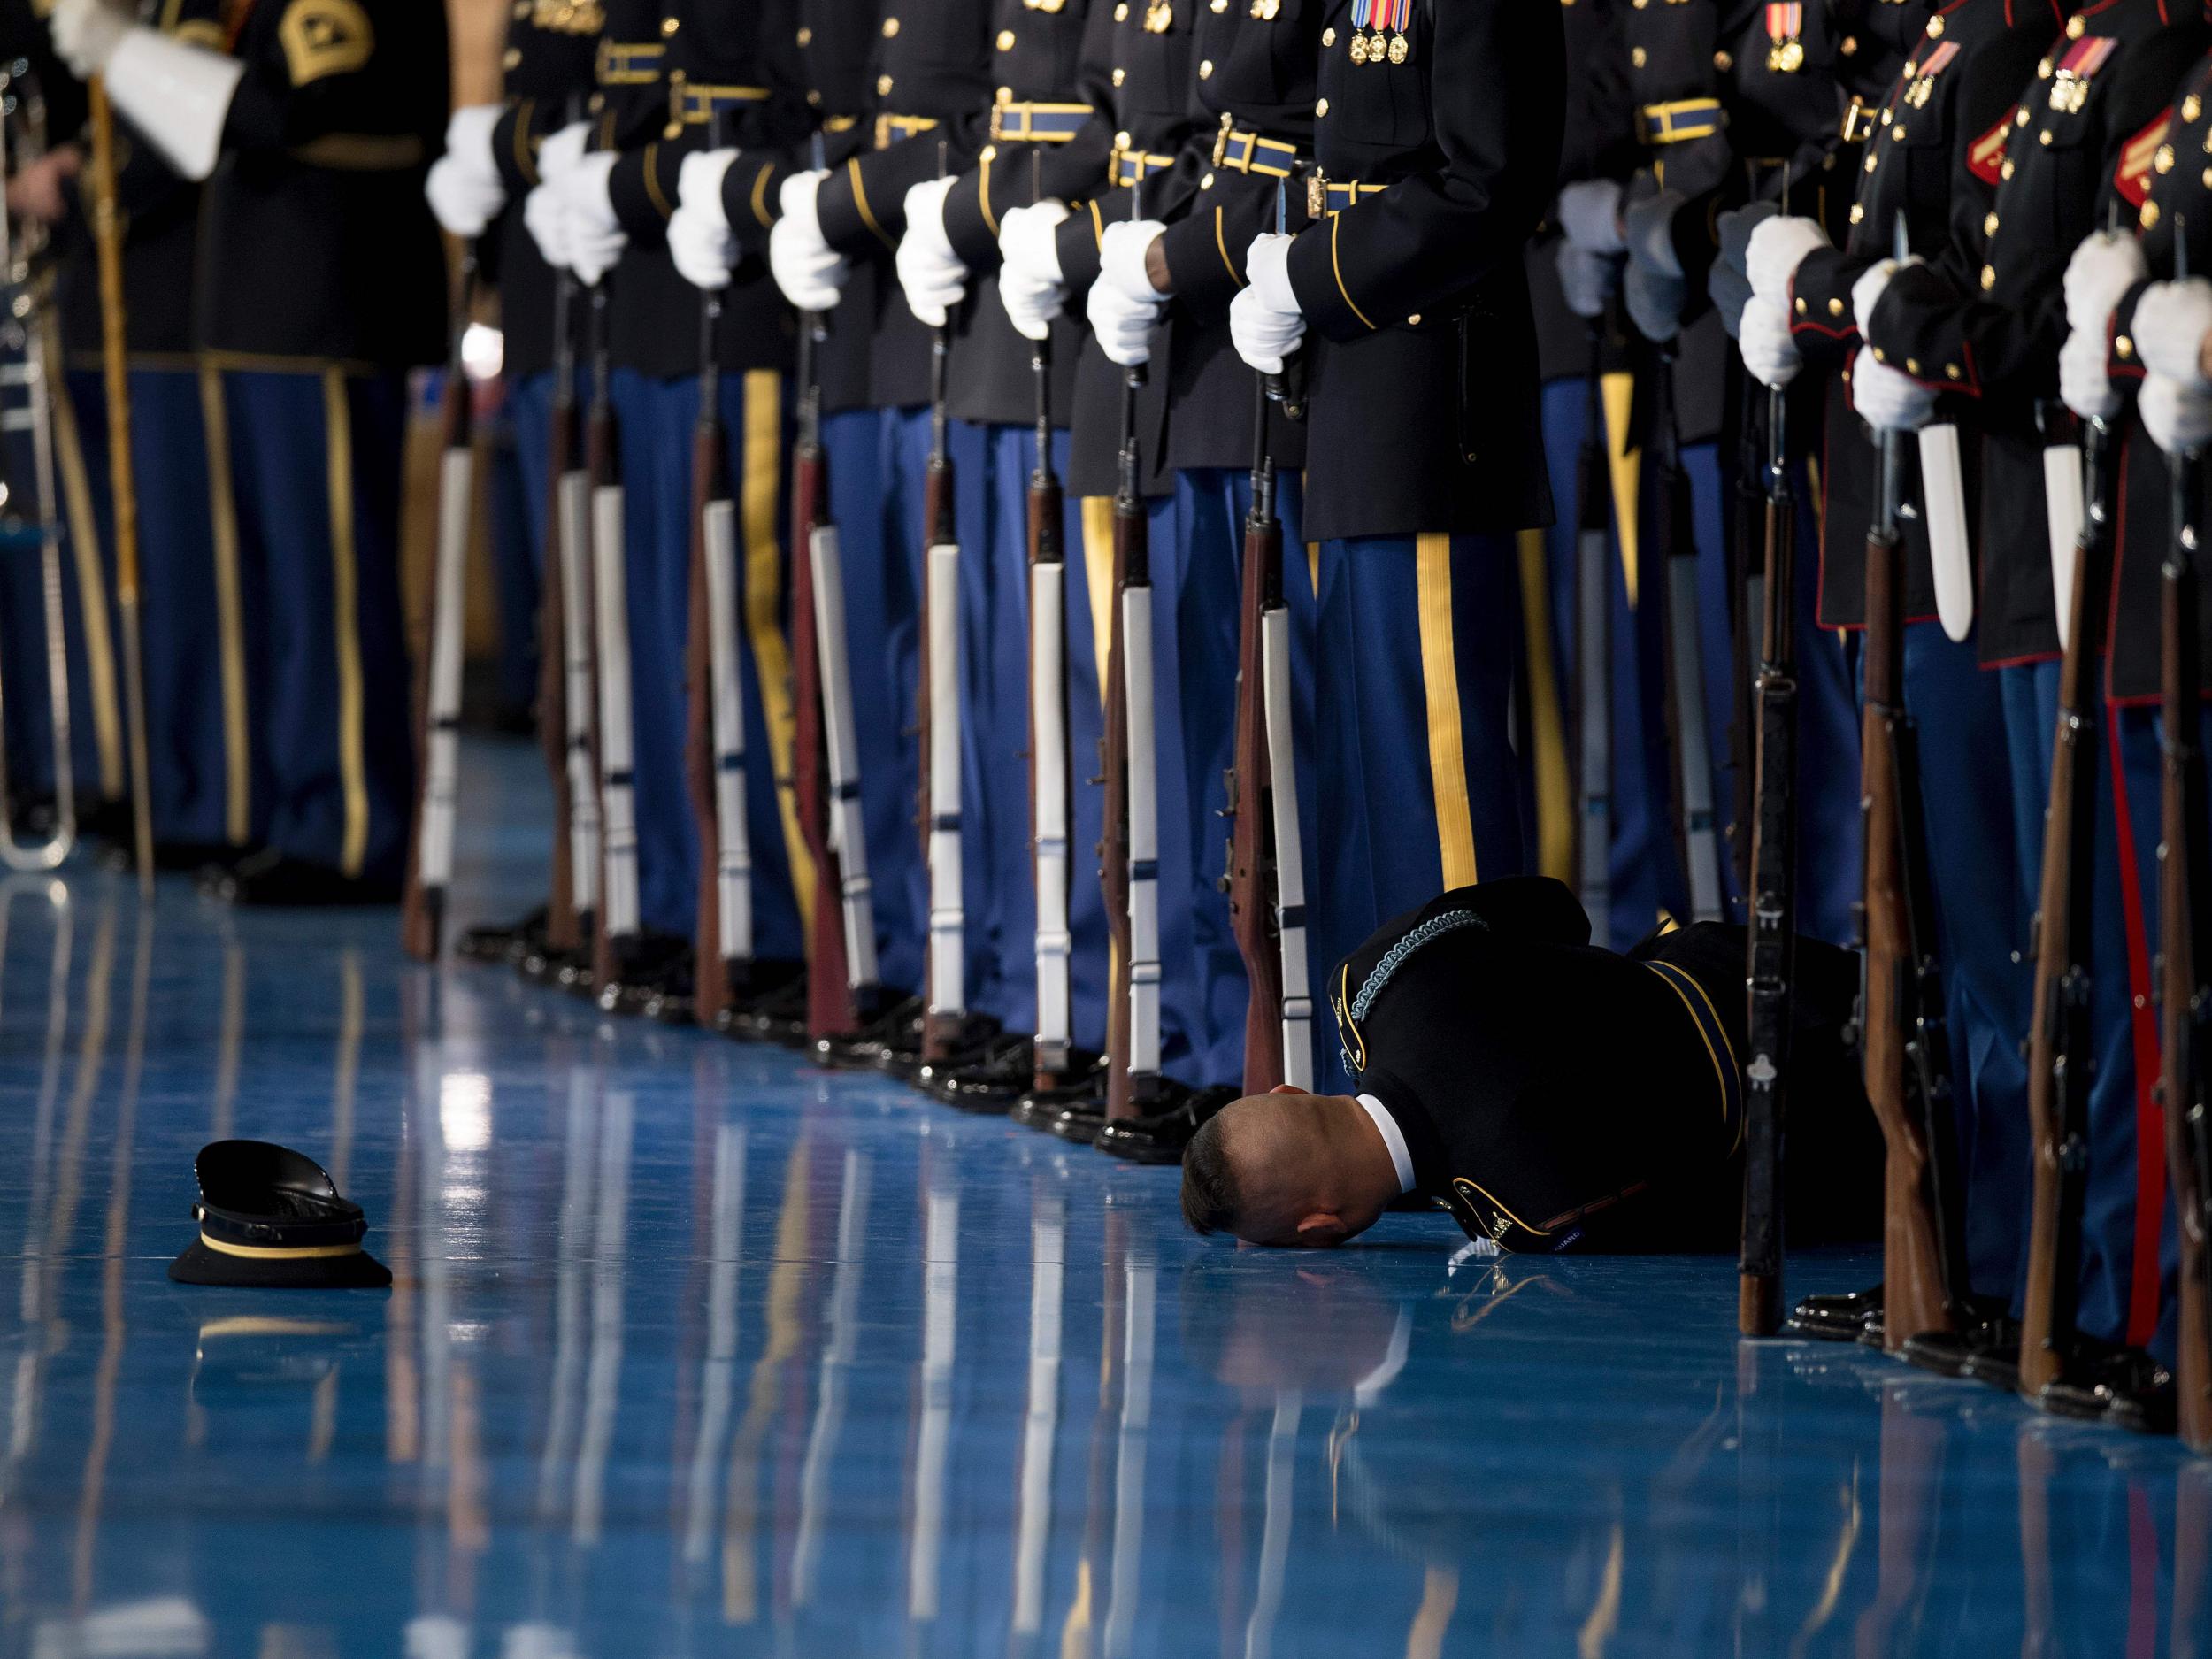 A member of the US Army Honor Guard lies on the floor after passing out during an Armed Forces Full Honor Farewell Review for US President Barack Obama